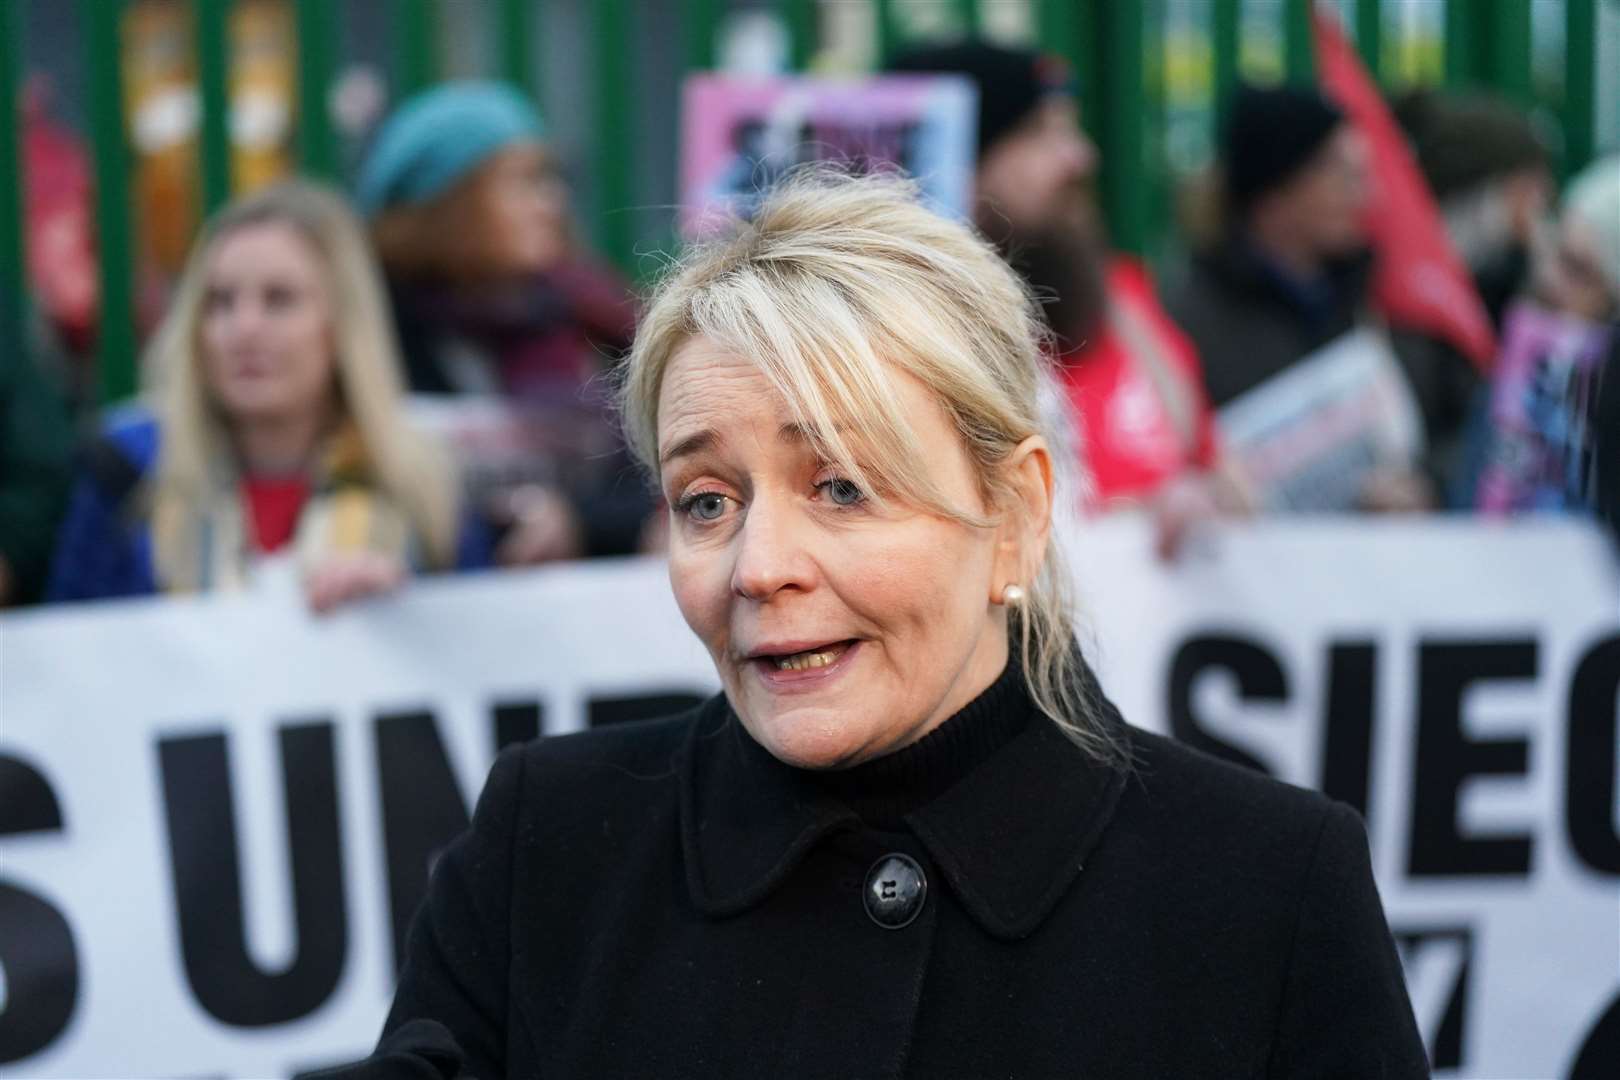 Unite union general secretary Sharon Graham joined strikers on a picket line in December (Jacob King/PA)